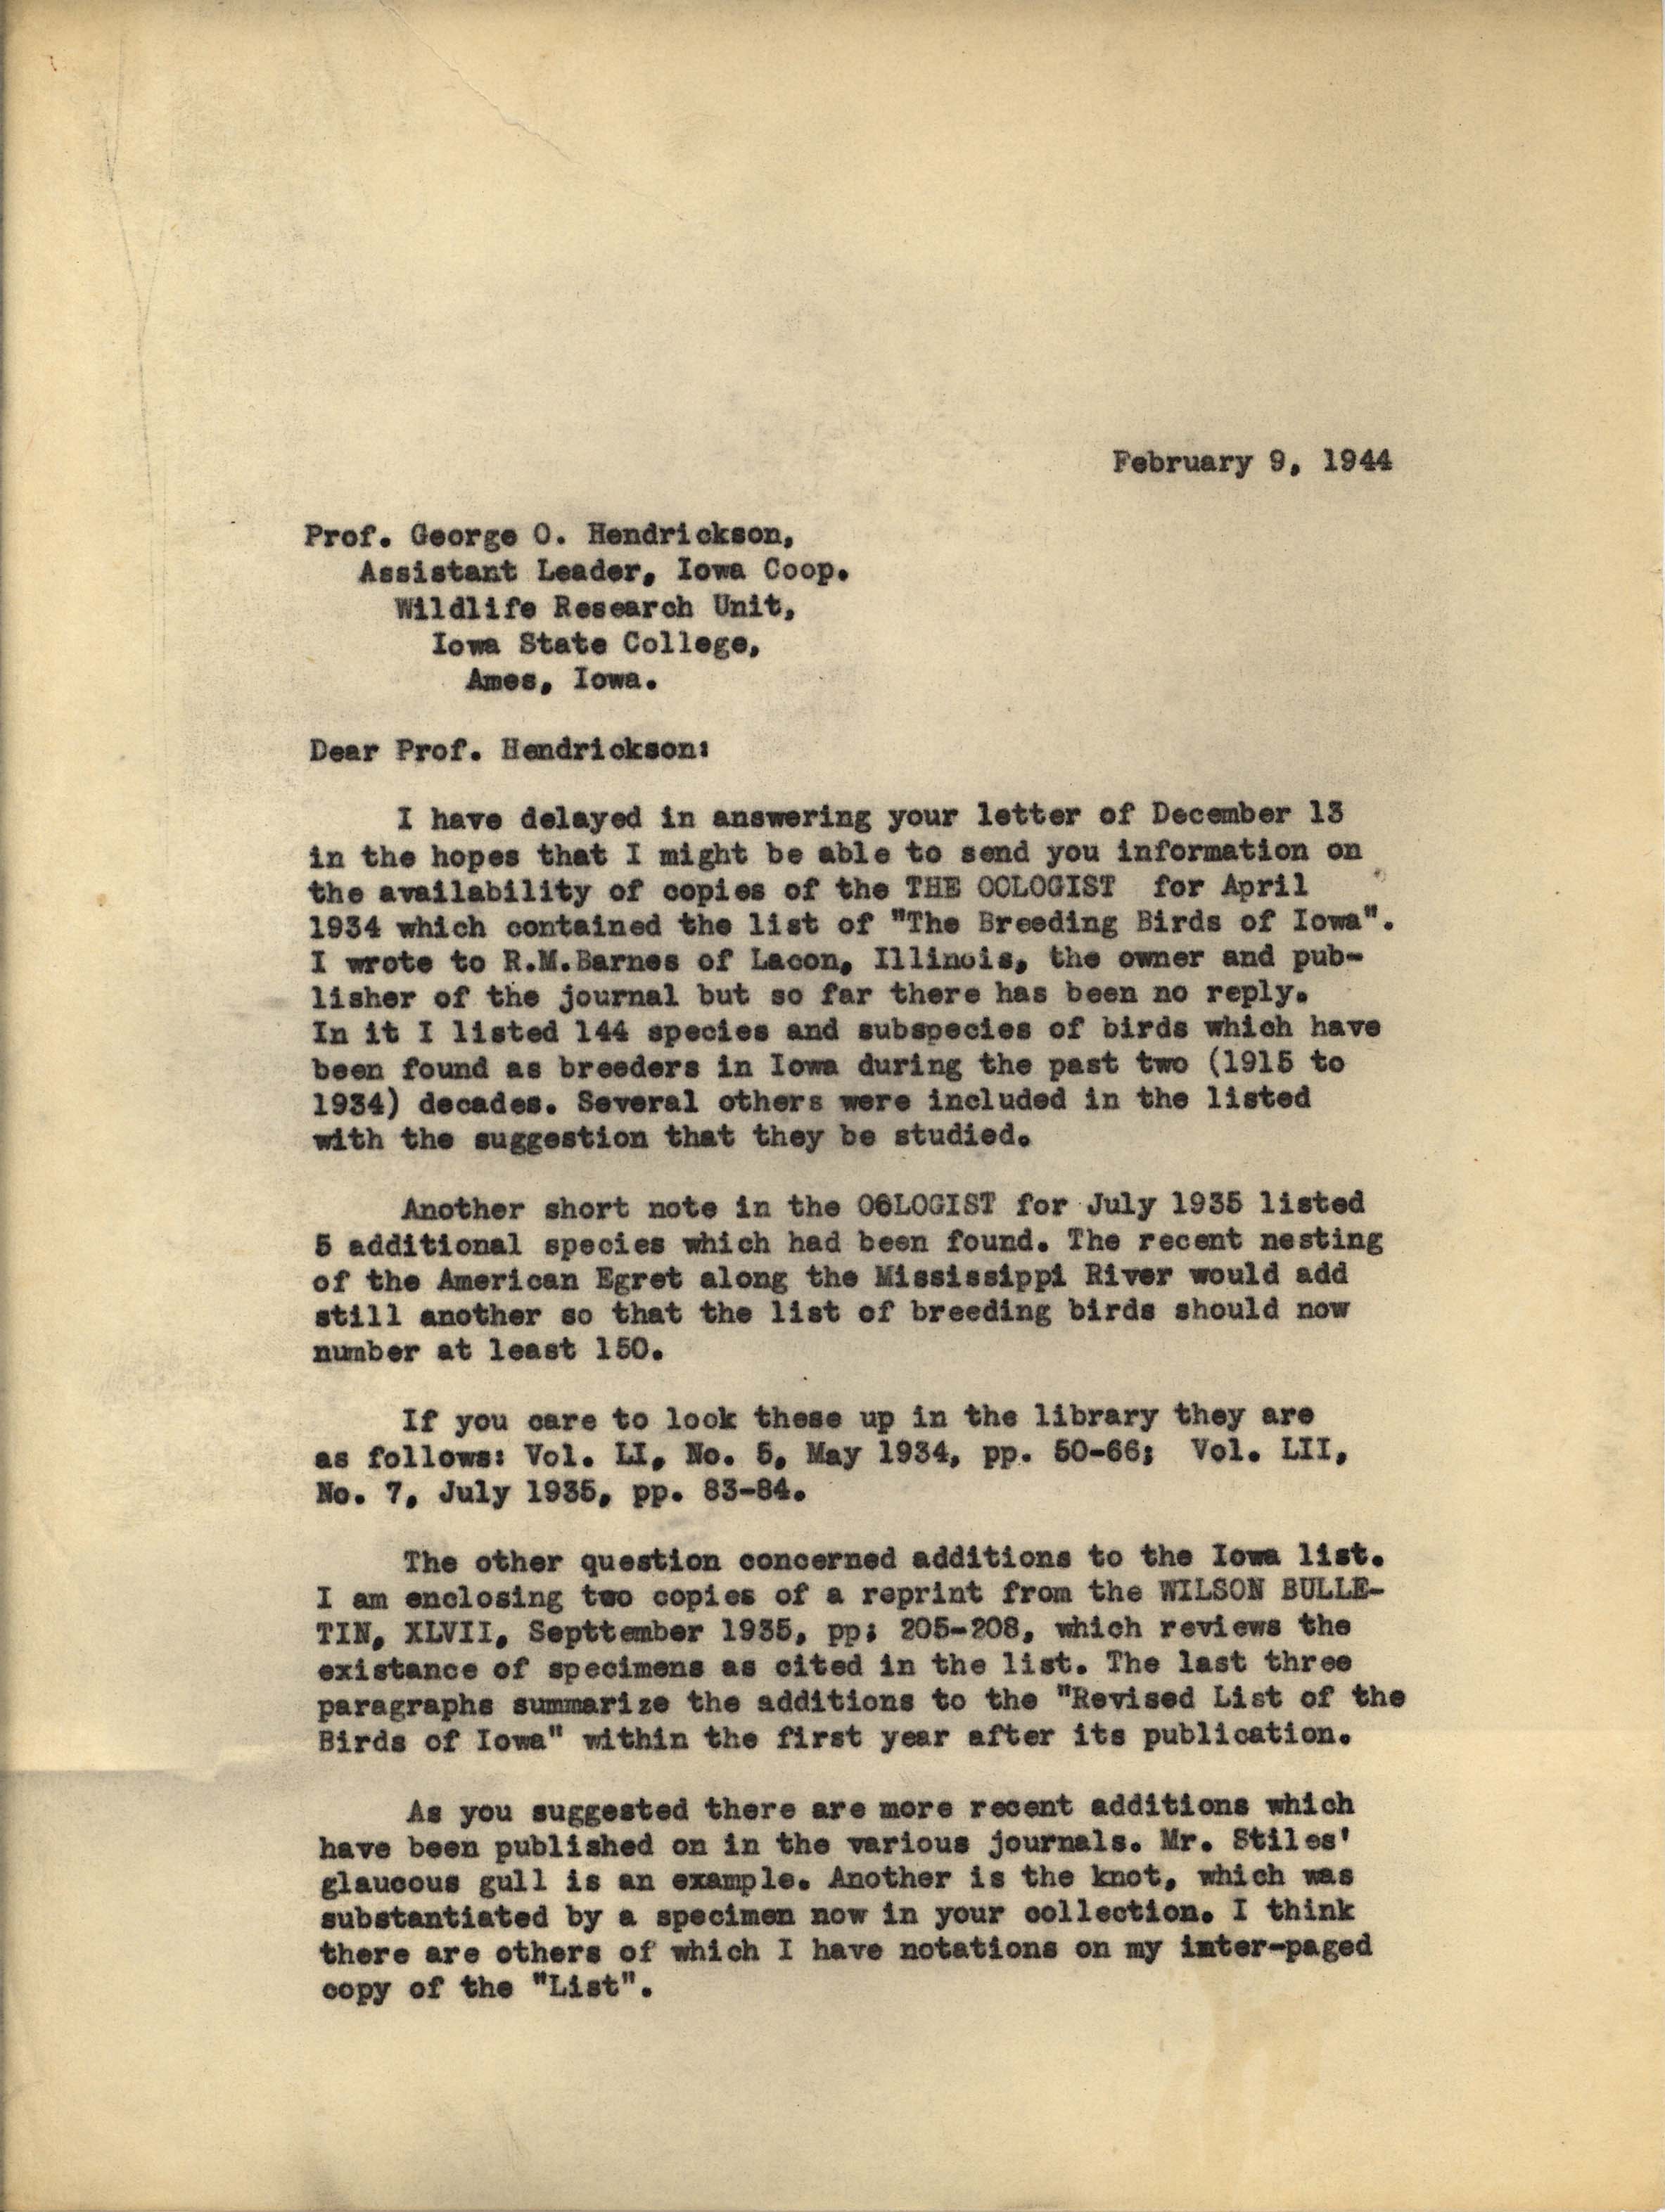 Philip DuMont letter to George Hendrickson regarding updates to the Revised List of the Birds of Iowa, February 9, 1944